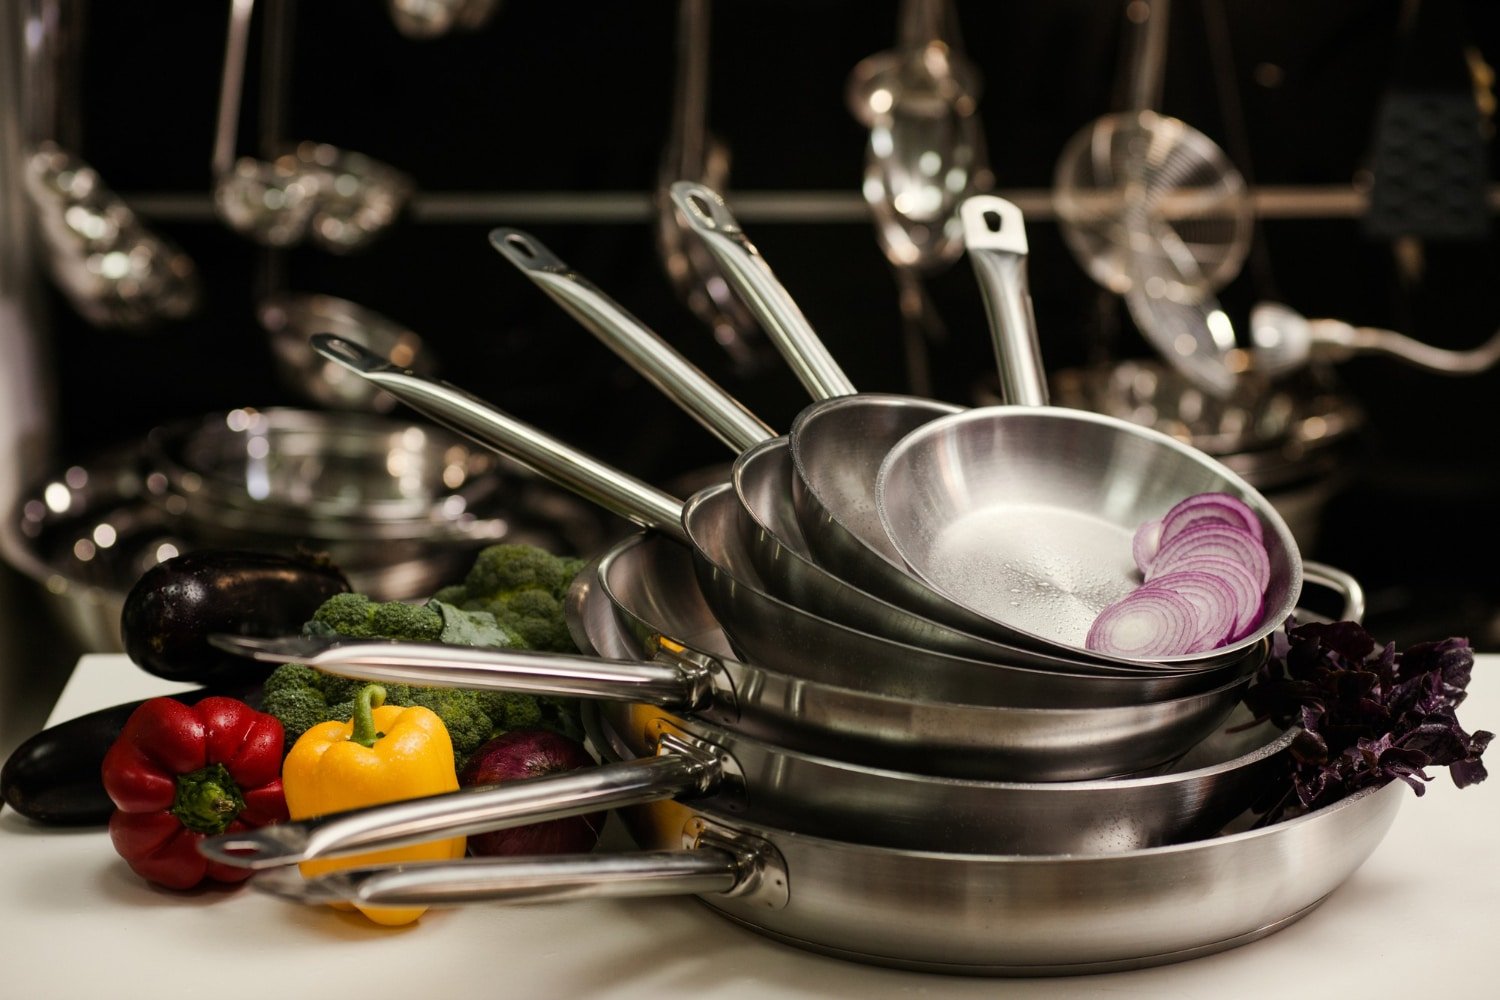 Master The Art Of Entertaining With Potluck’s Essential Cookware Sets